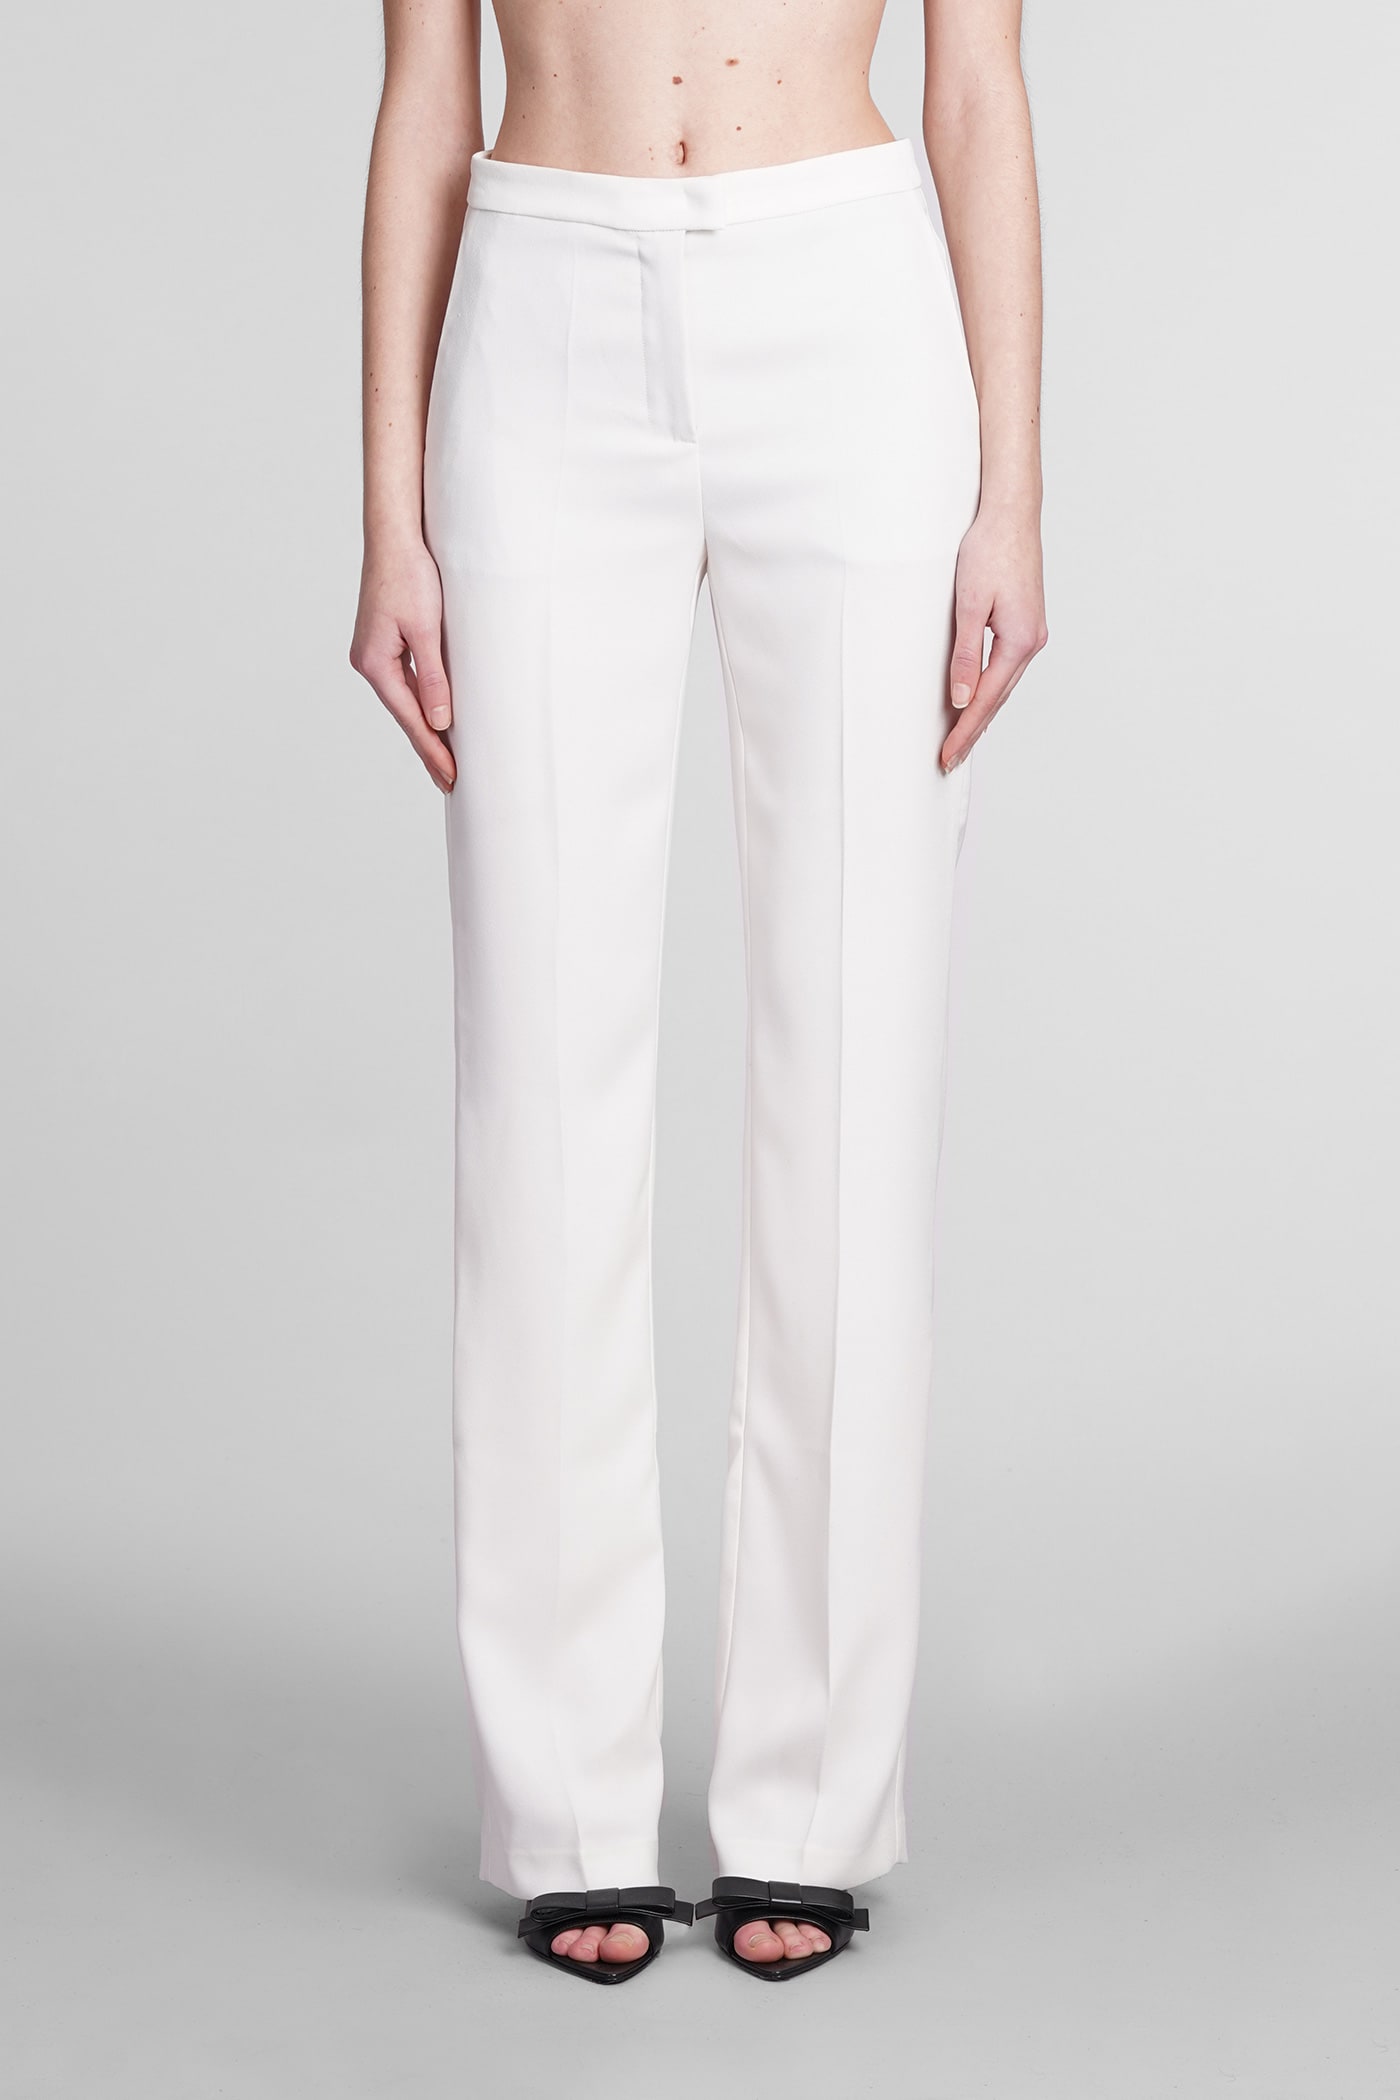 Gladys Pants In White Polyester